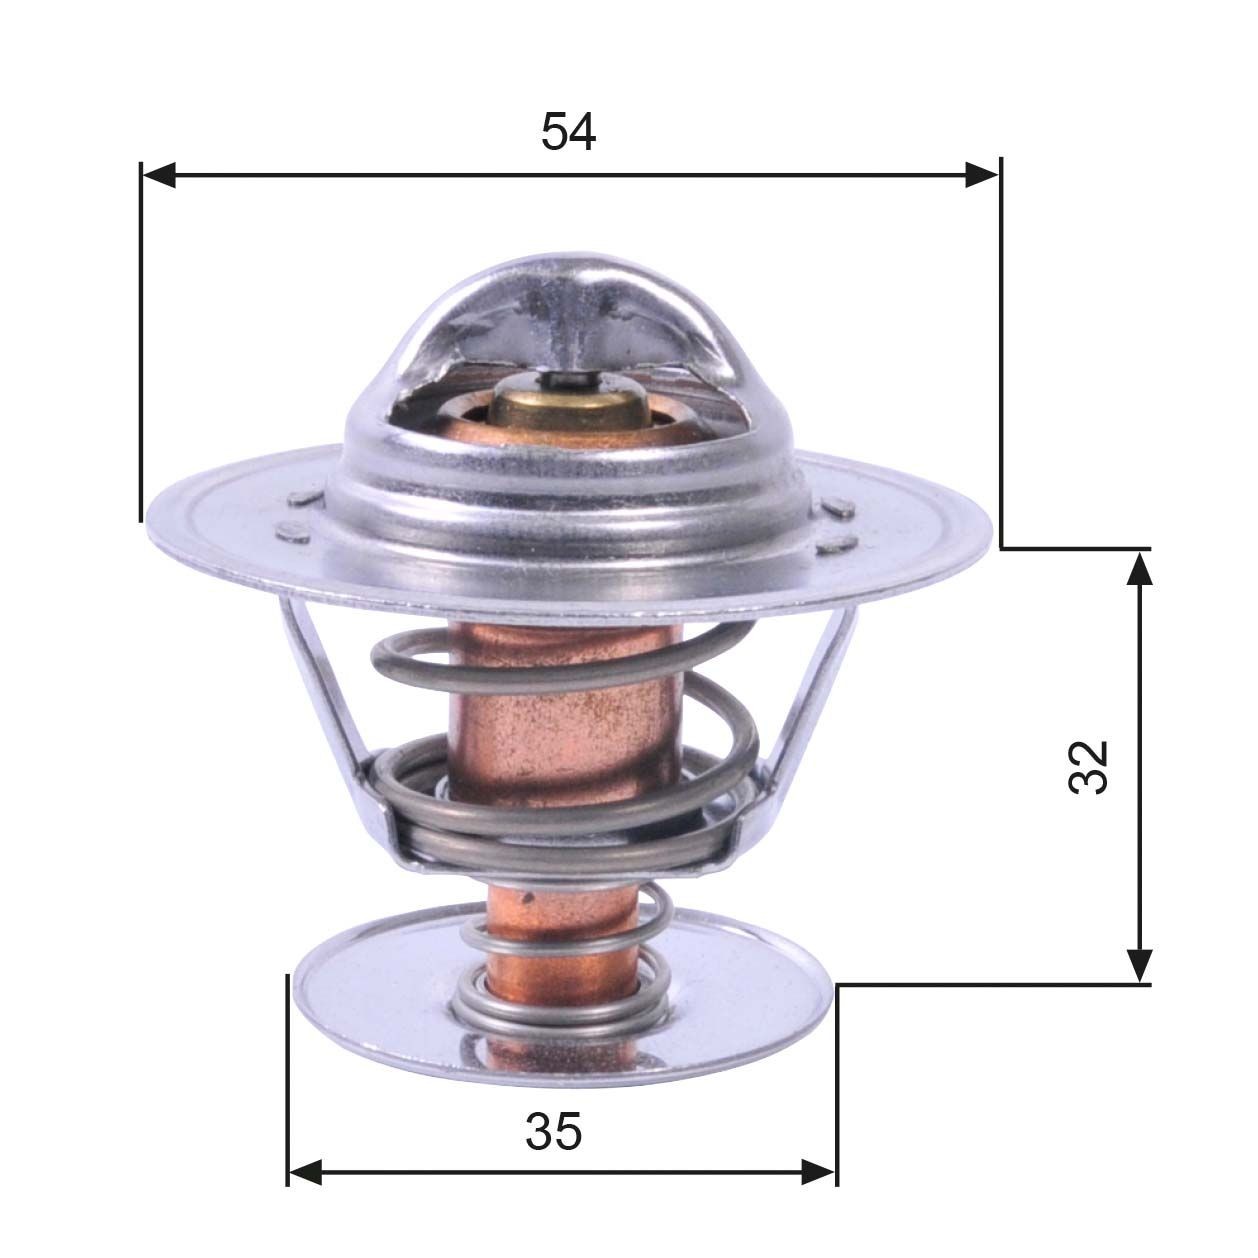 GATES TH11292G1 Engine thermostat Opening Temperature: 92°C, with gaskets/seals, without housing